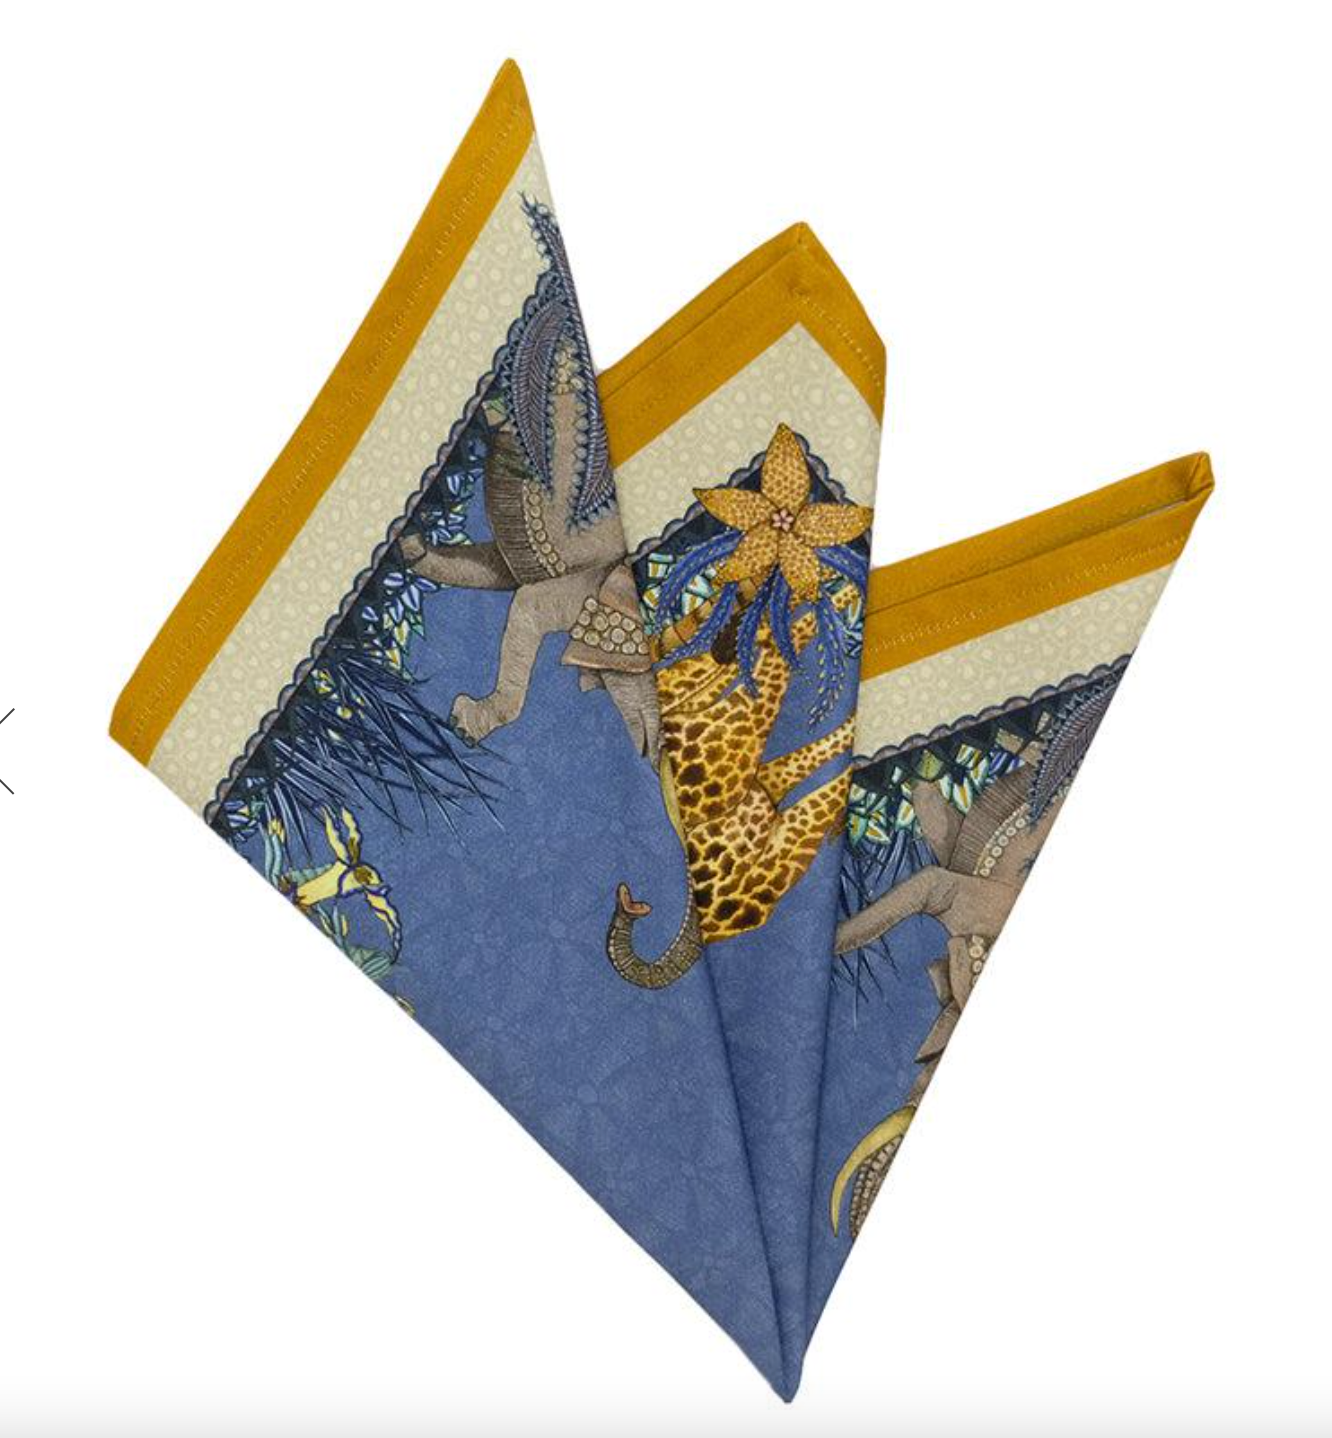 Ardmore "Sabie Forest Tanzanite" napkin sets from South Africa